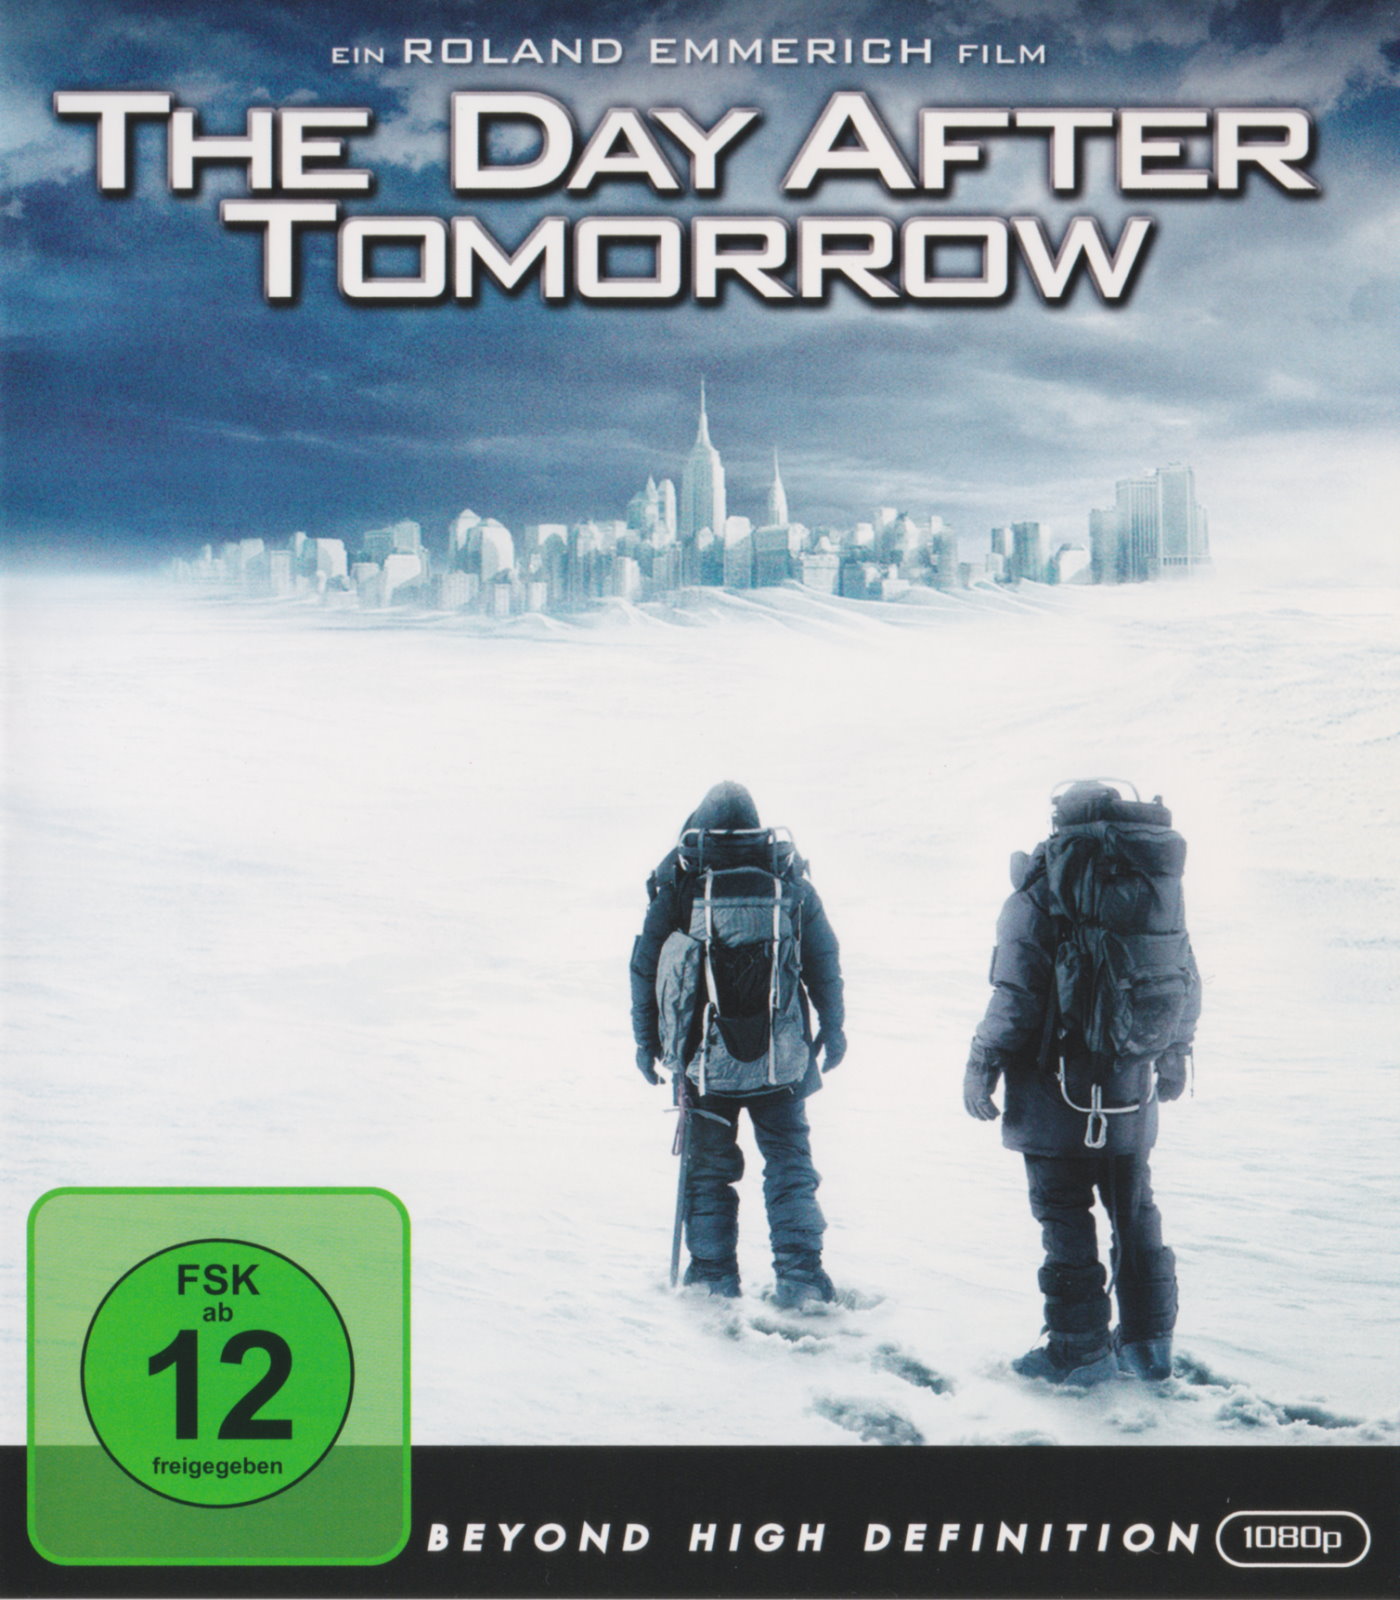 Cover - The Day After Tomorrow.jpg